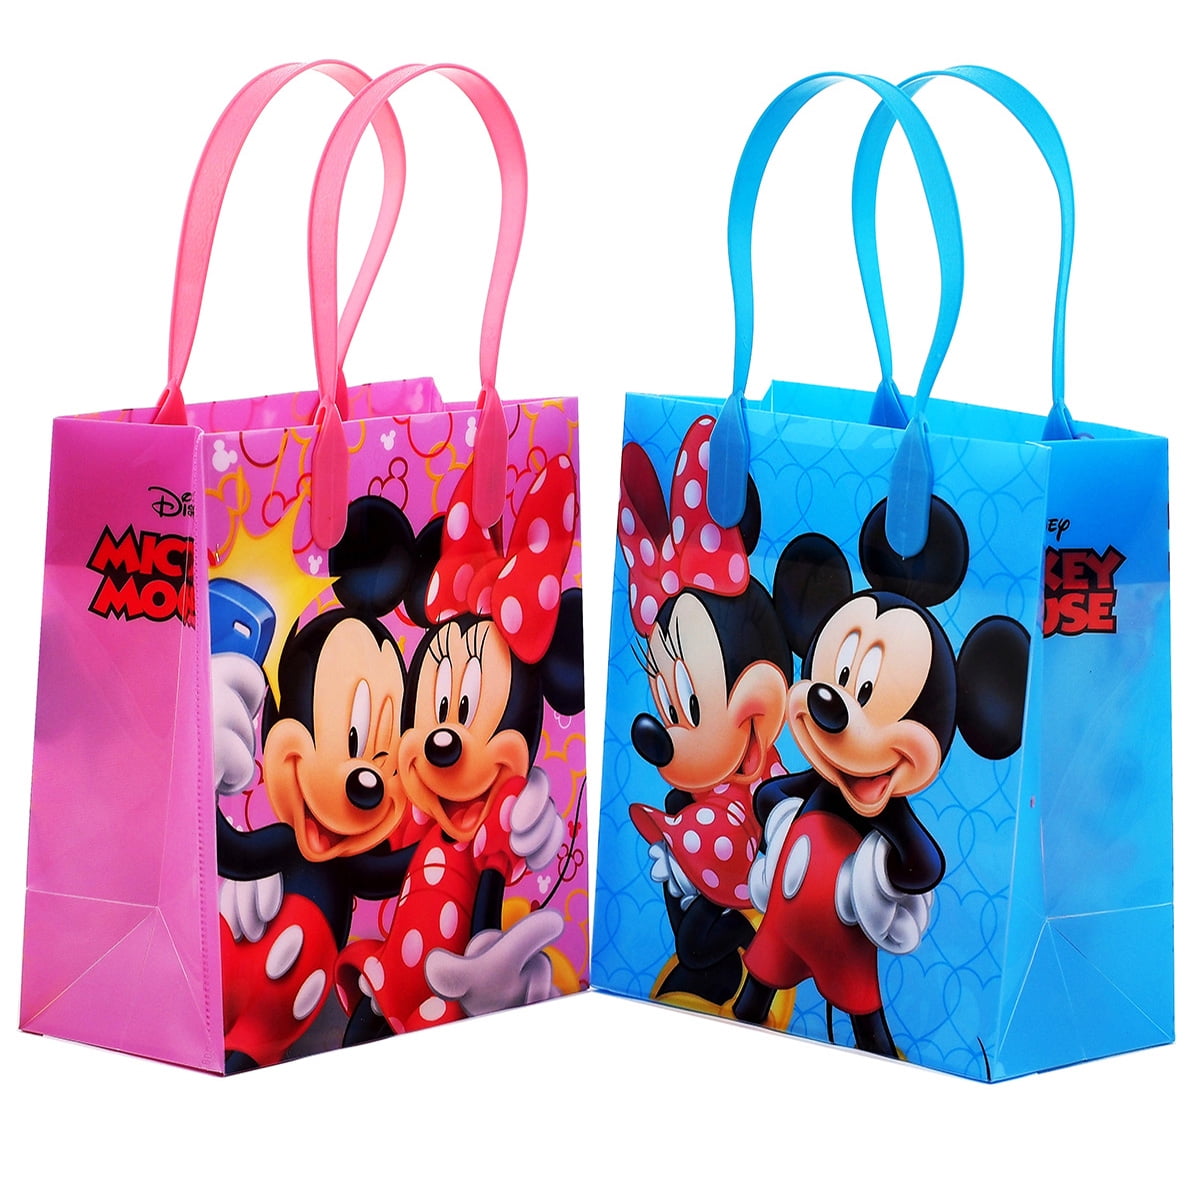 Disney Mickey and Minnie Goody Bag Party Goodie Gift Birthday Candy Bags 12pc 